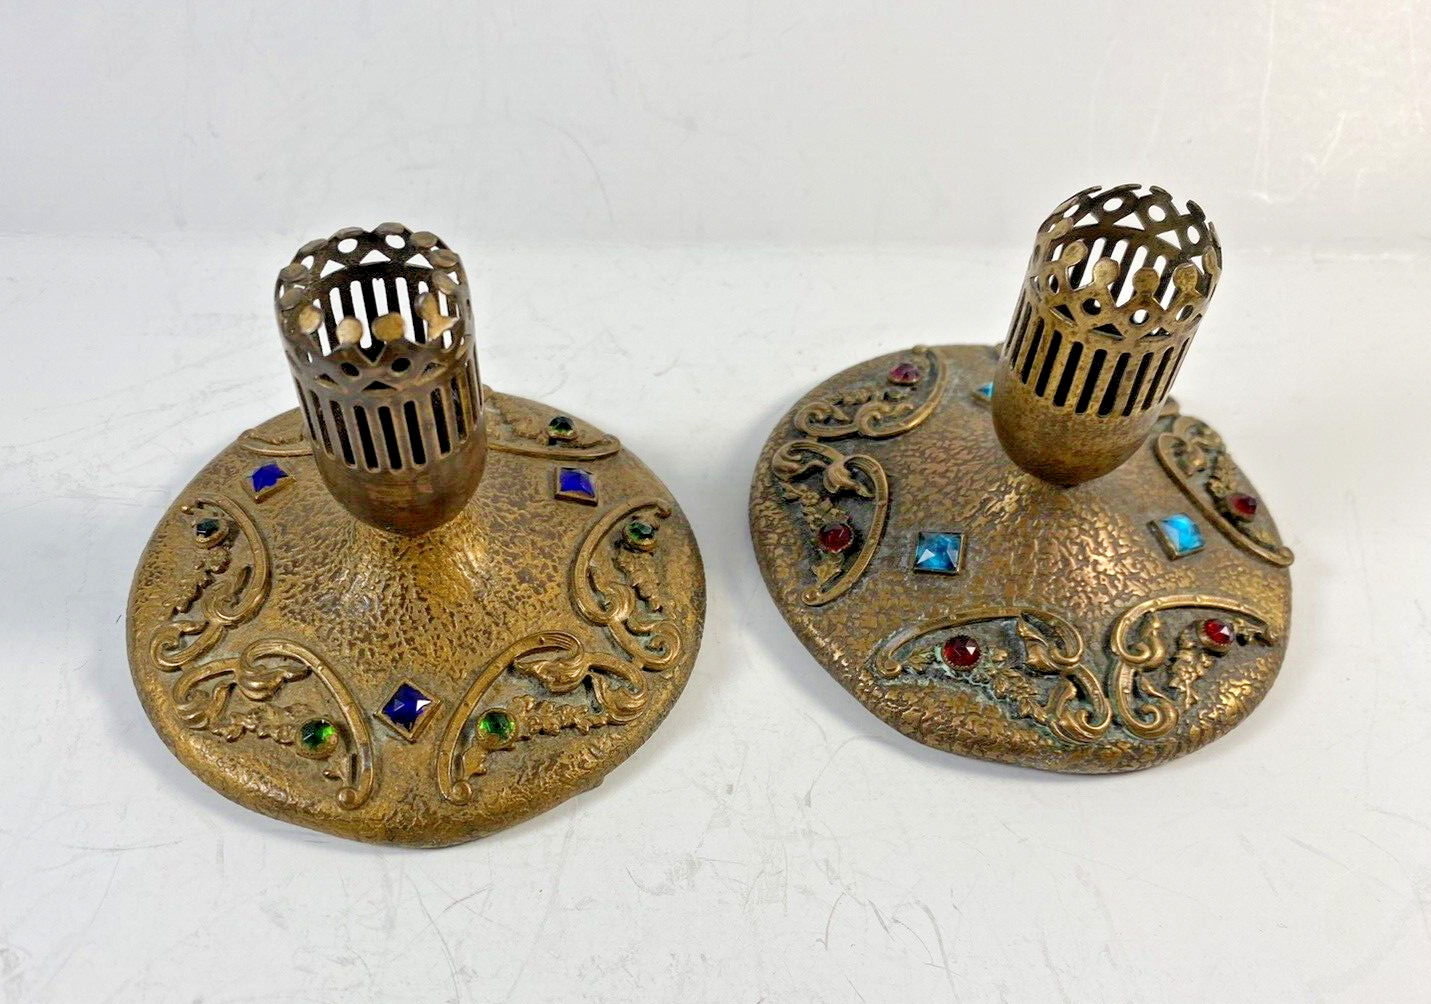 Pair of Rare and Unusual Antique Jeweled Metal Candlesticks